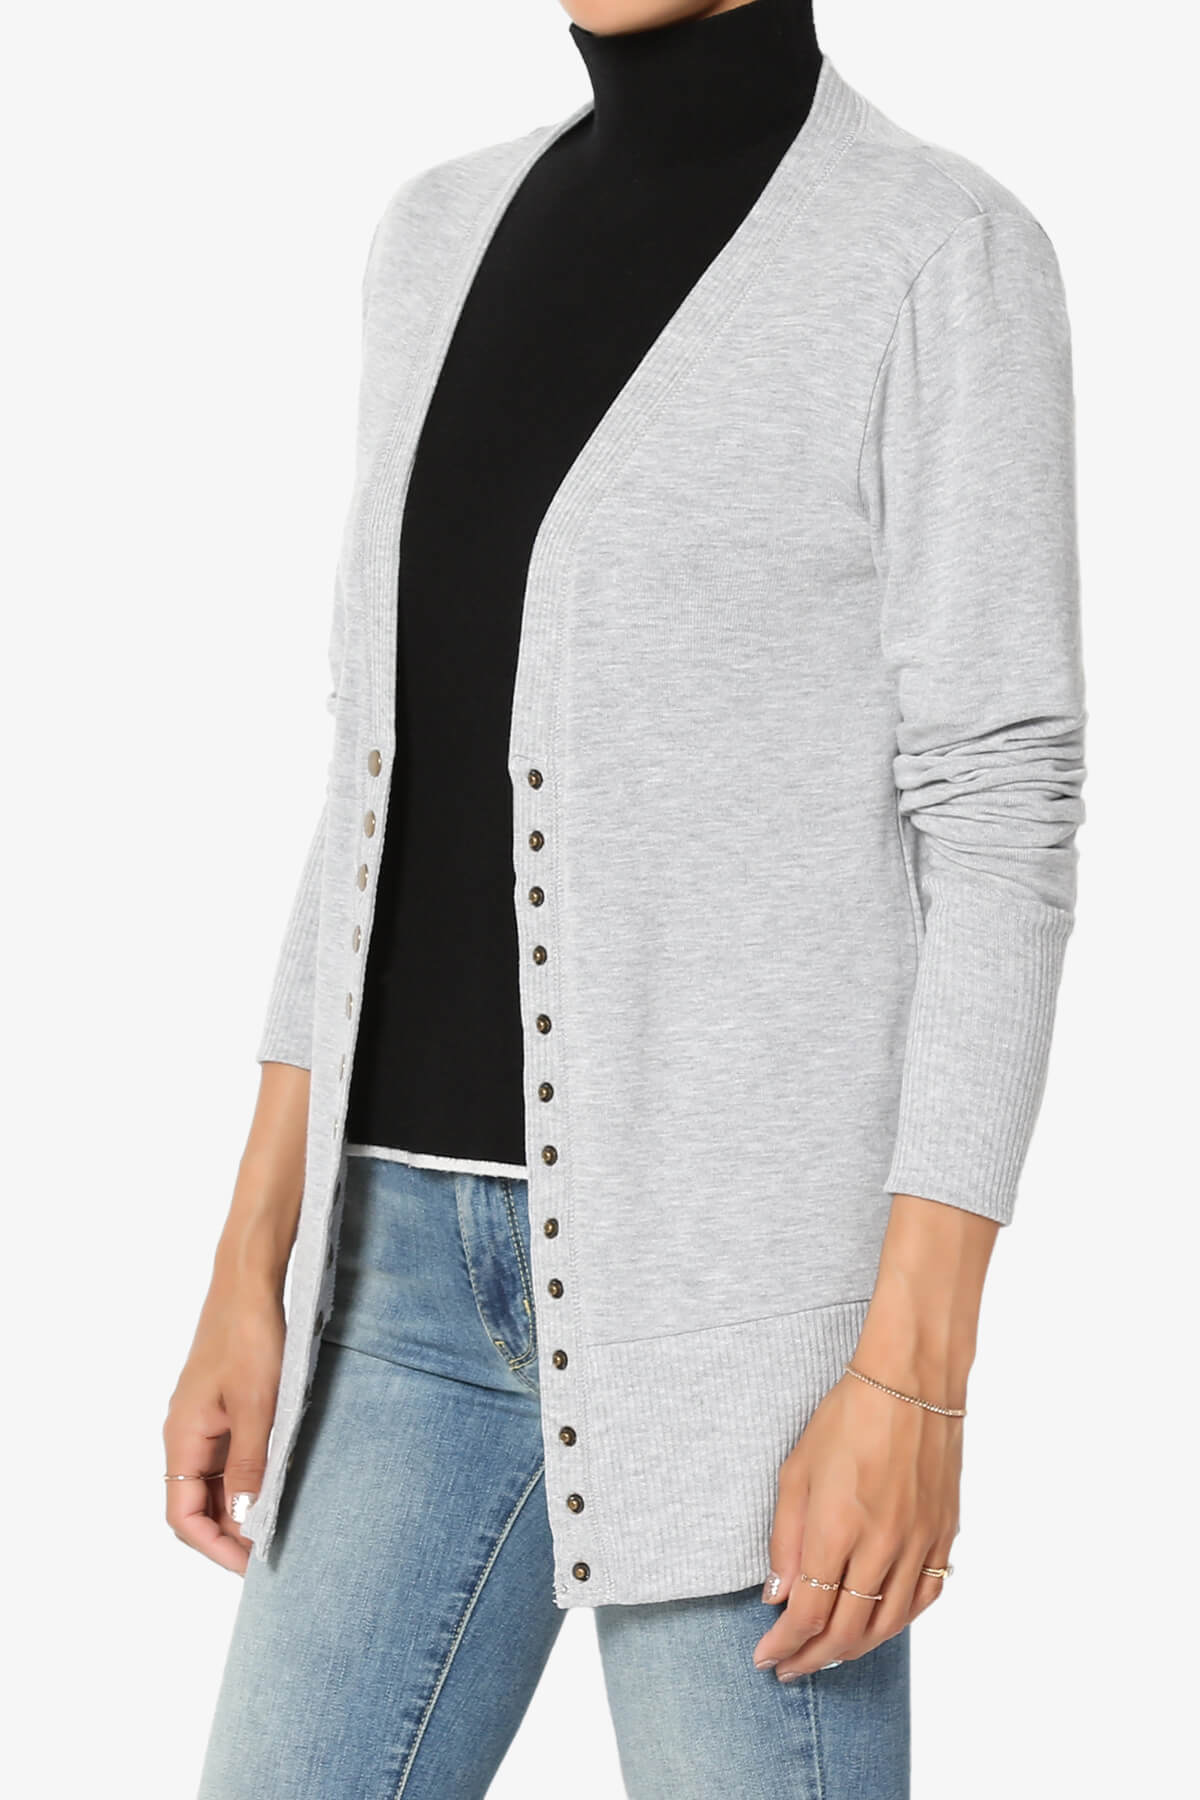 Load image into Gallery viewer, Braeden Snap Button V-Neck Cardigan HEATHER GREY_3
